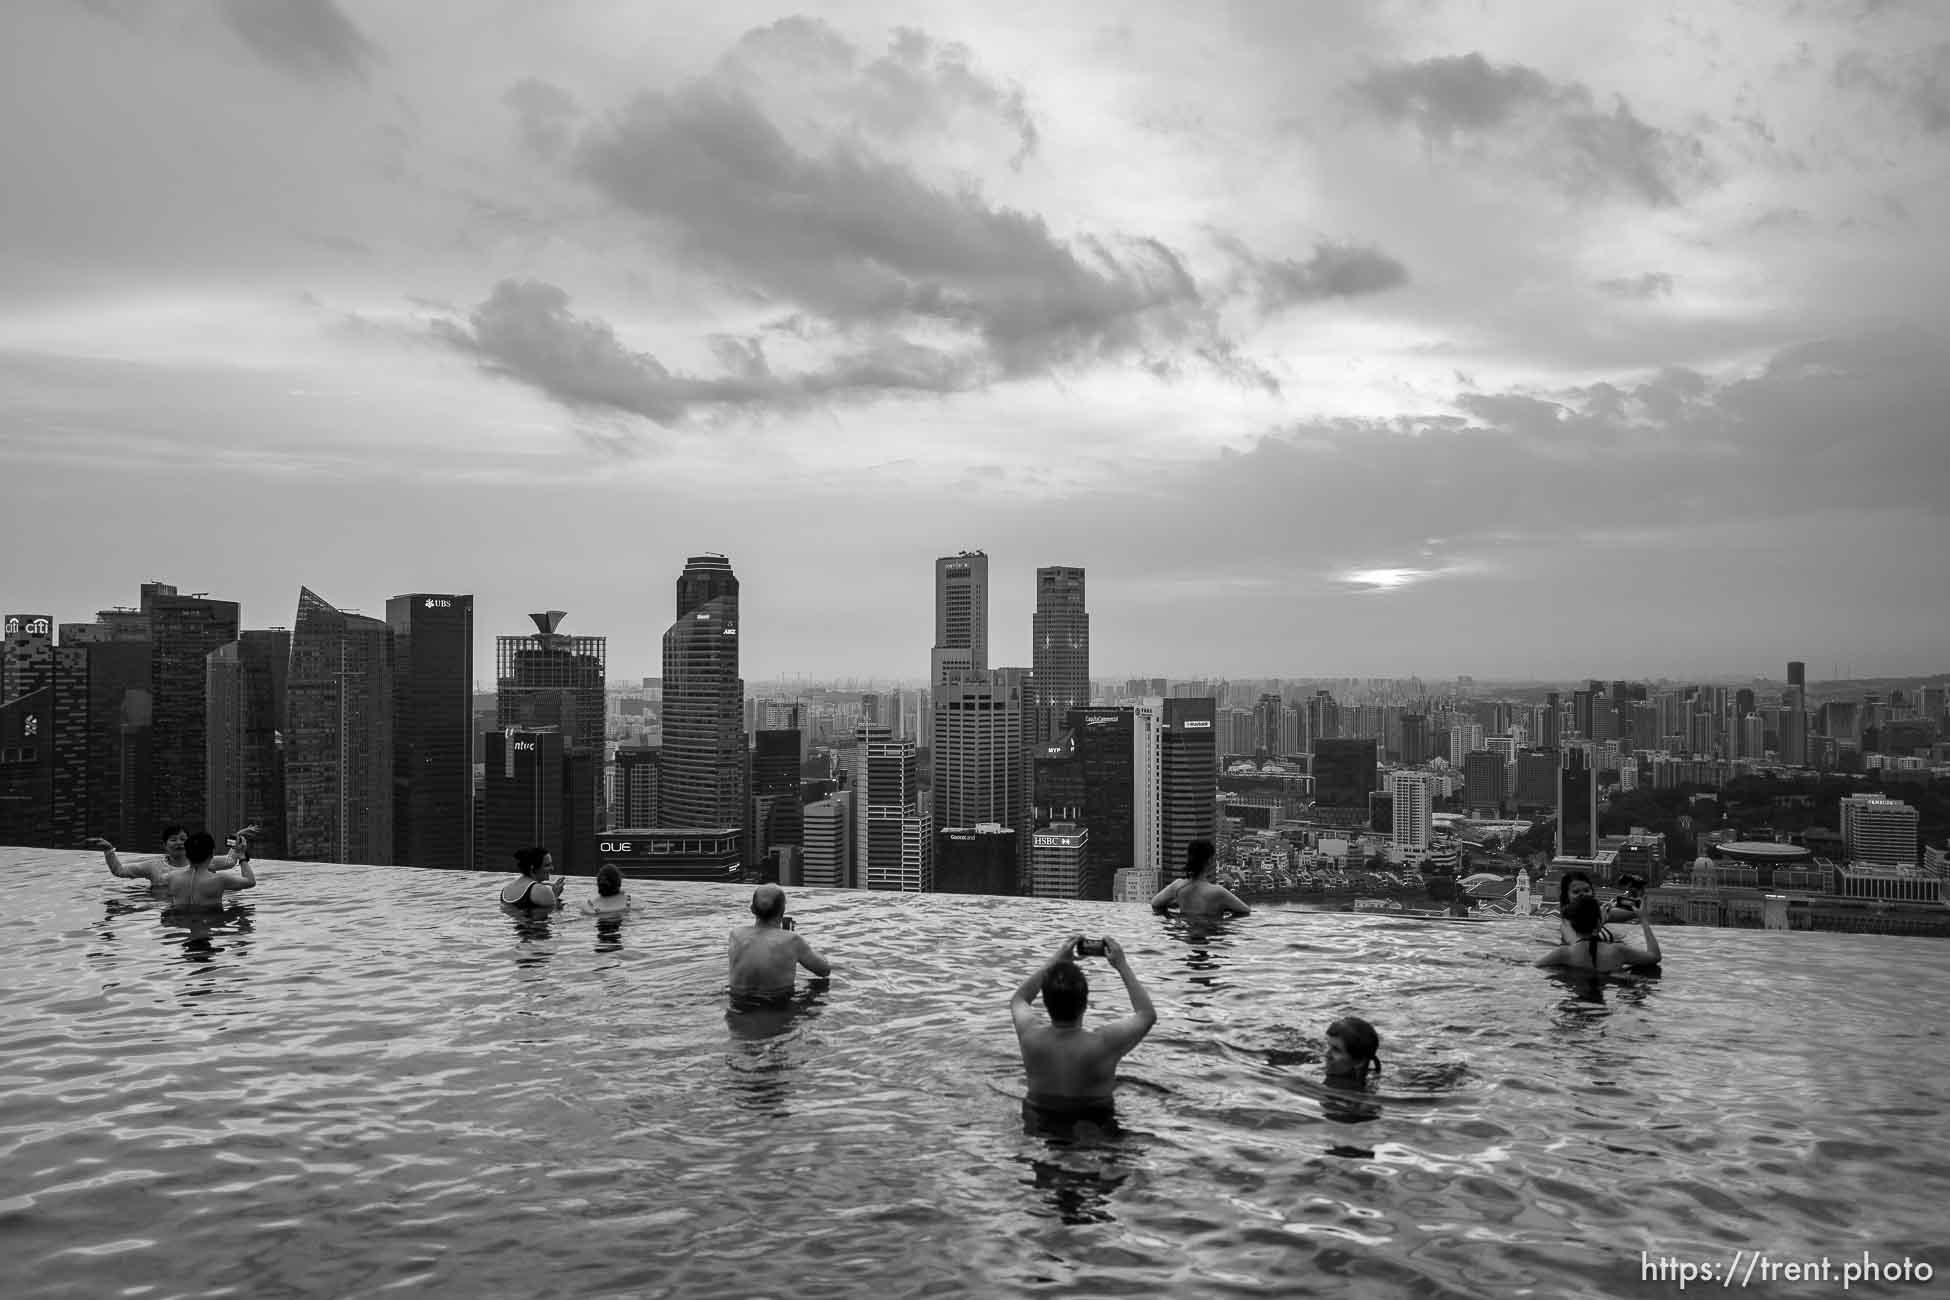 Marina Sands Hotel rooftop pool, Singapore, July 21, 2019